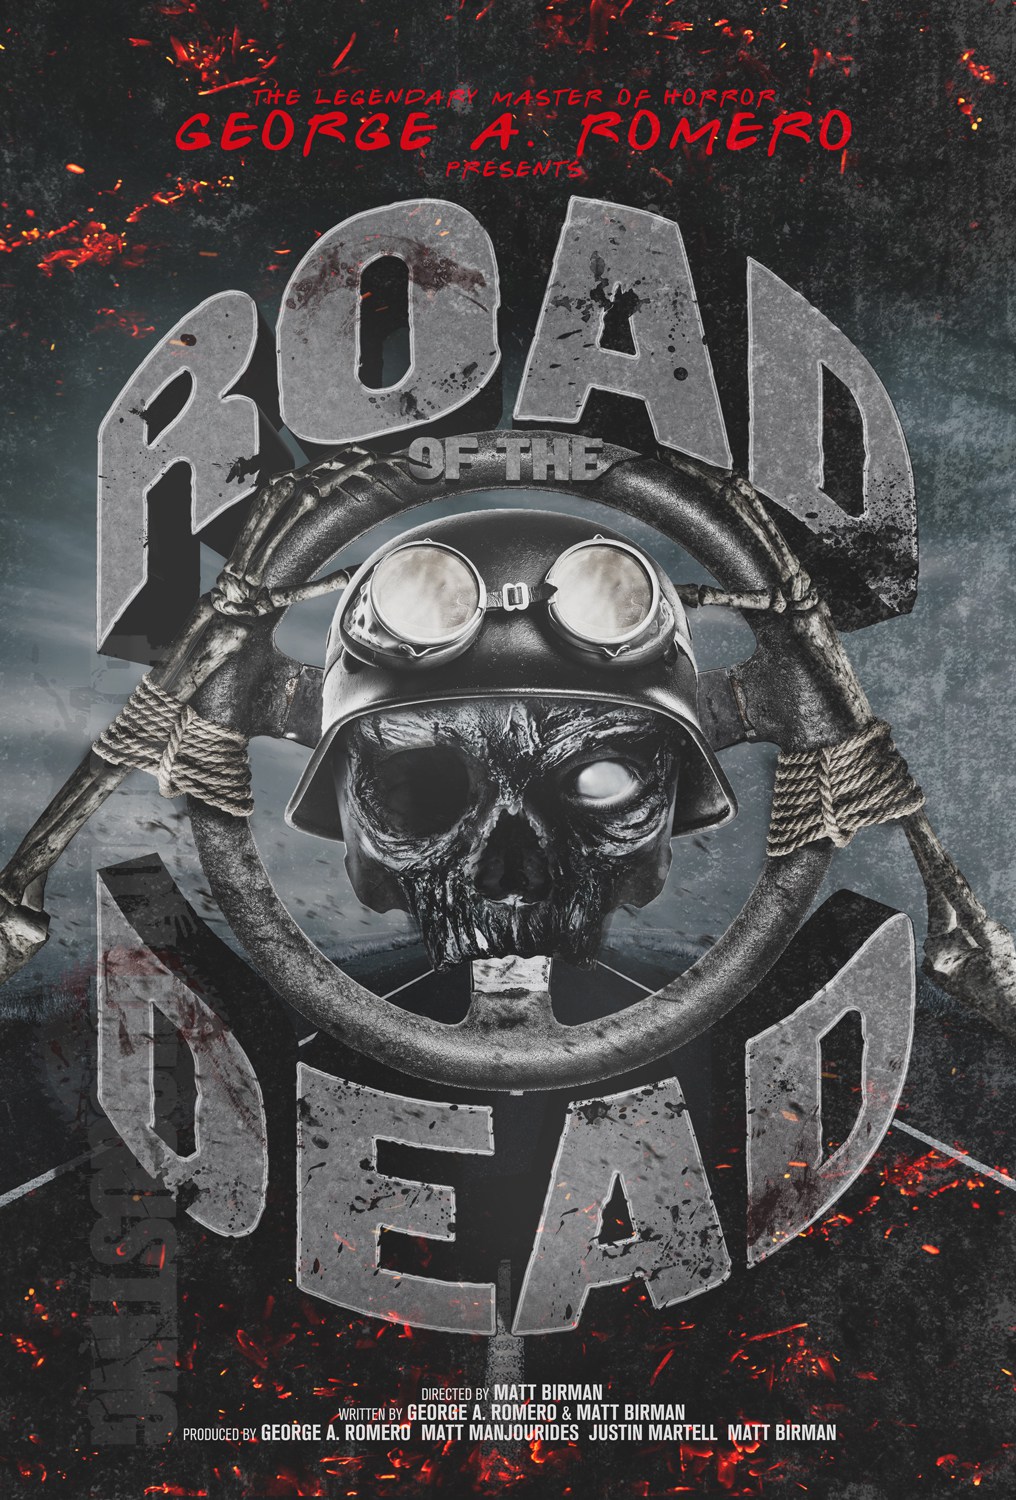 Road Of The Dead Watermarked